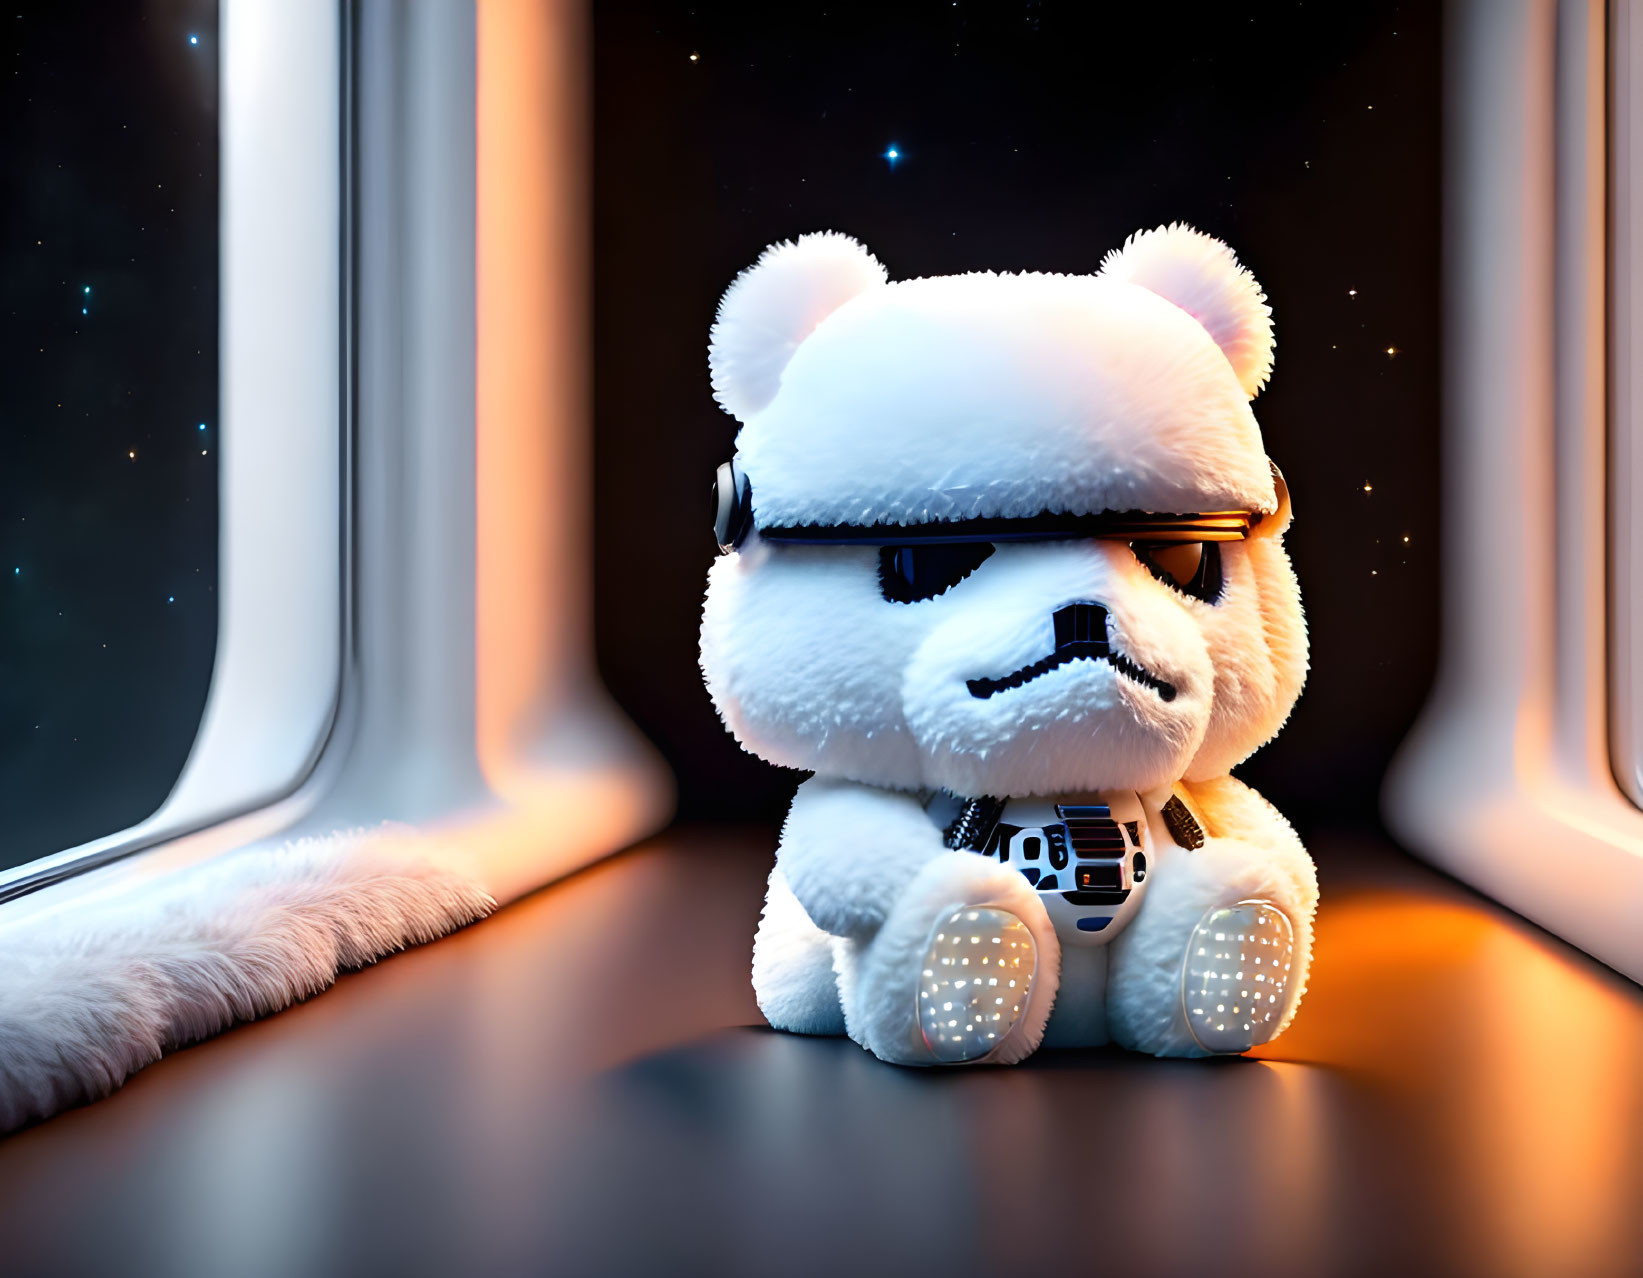 Plush toy bear with sunglasses gazes out spaceship window